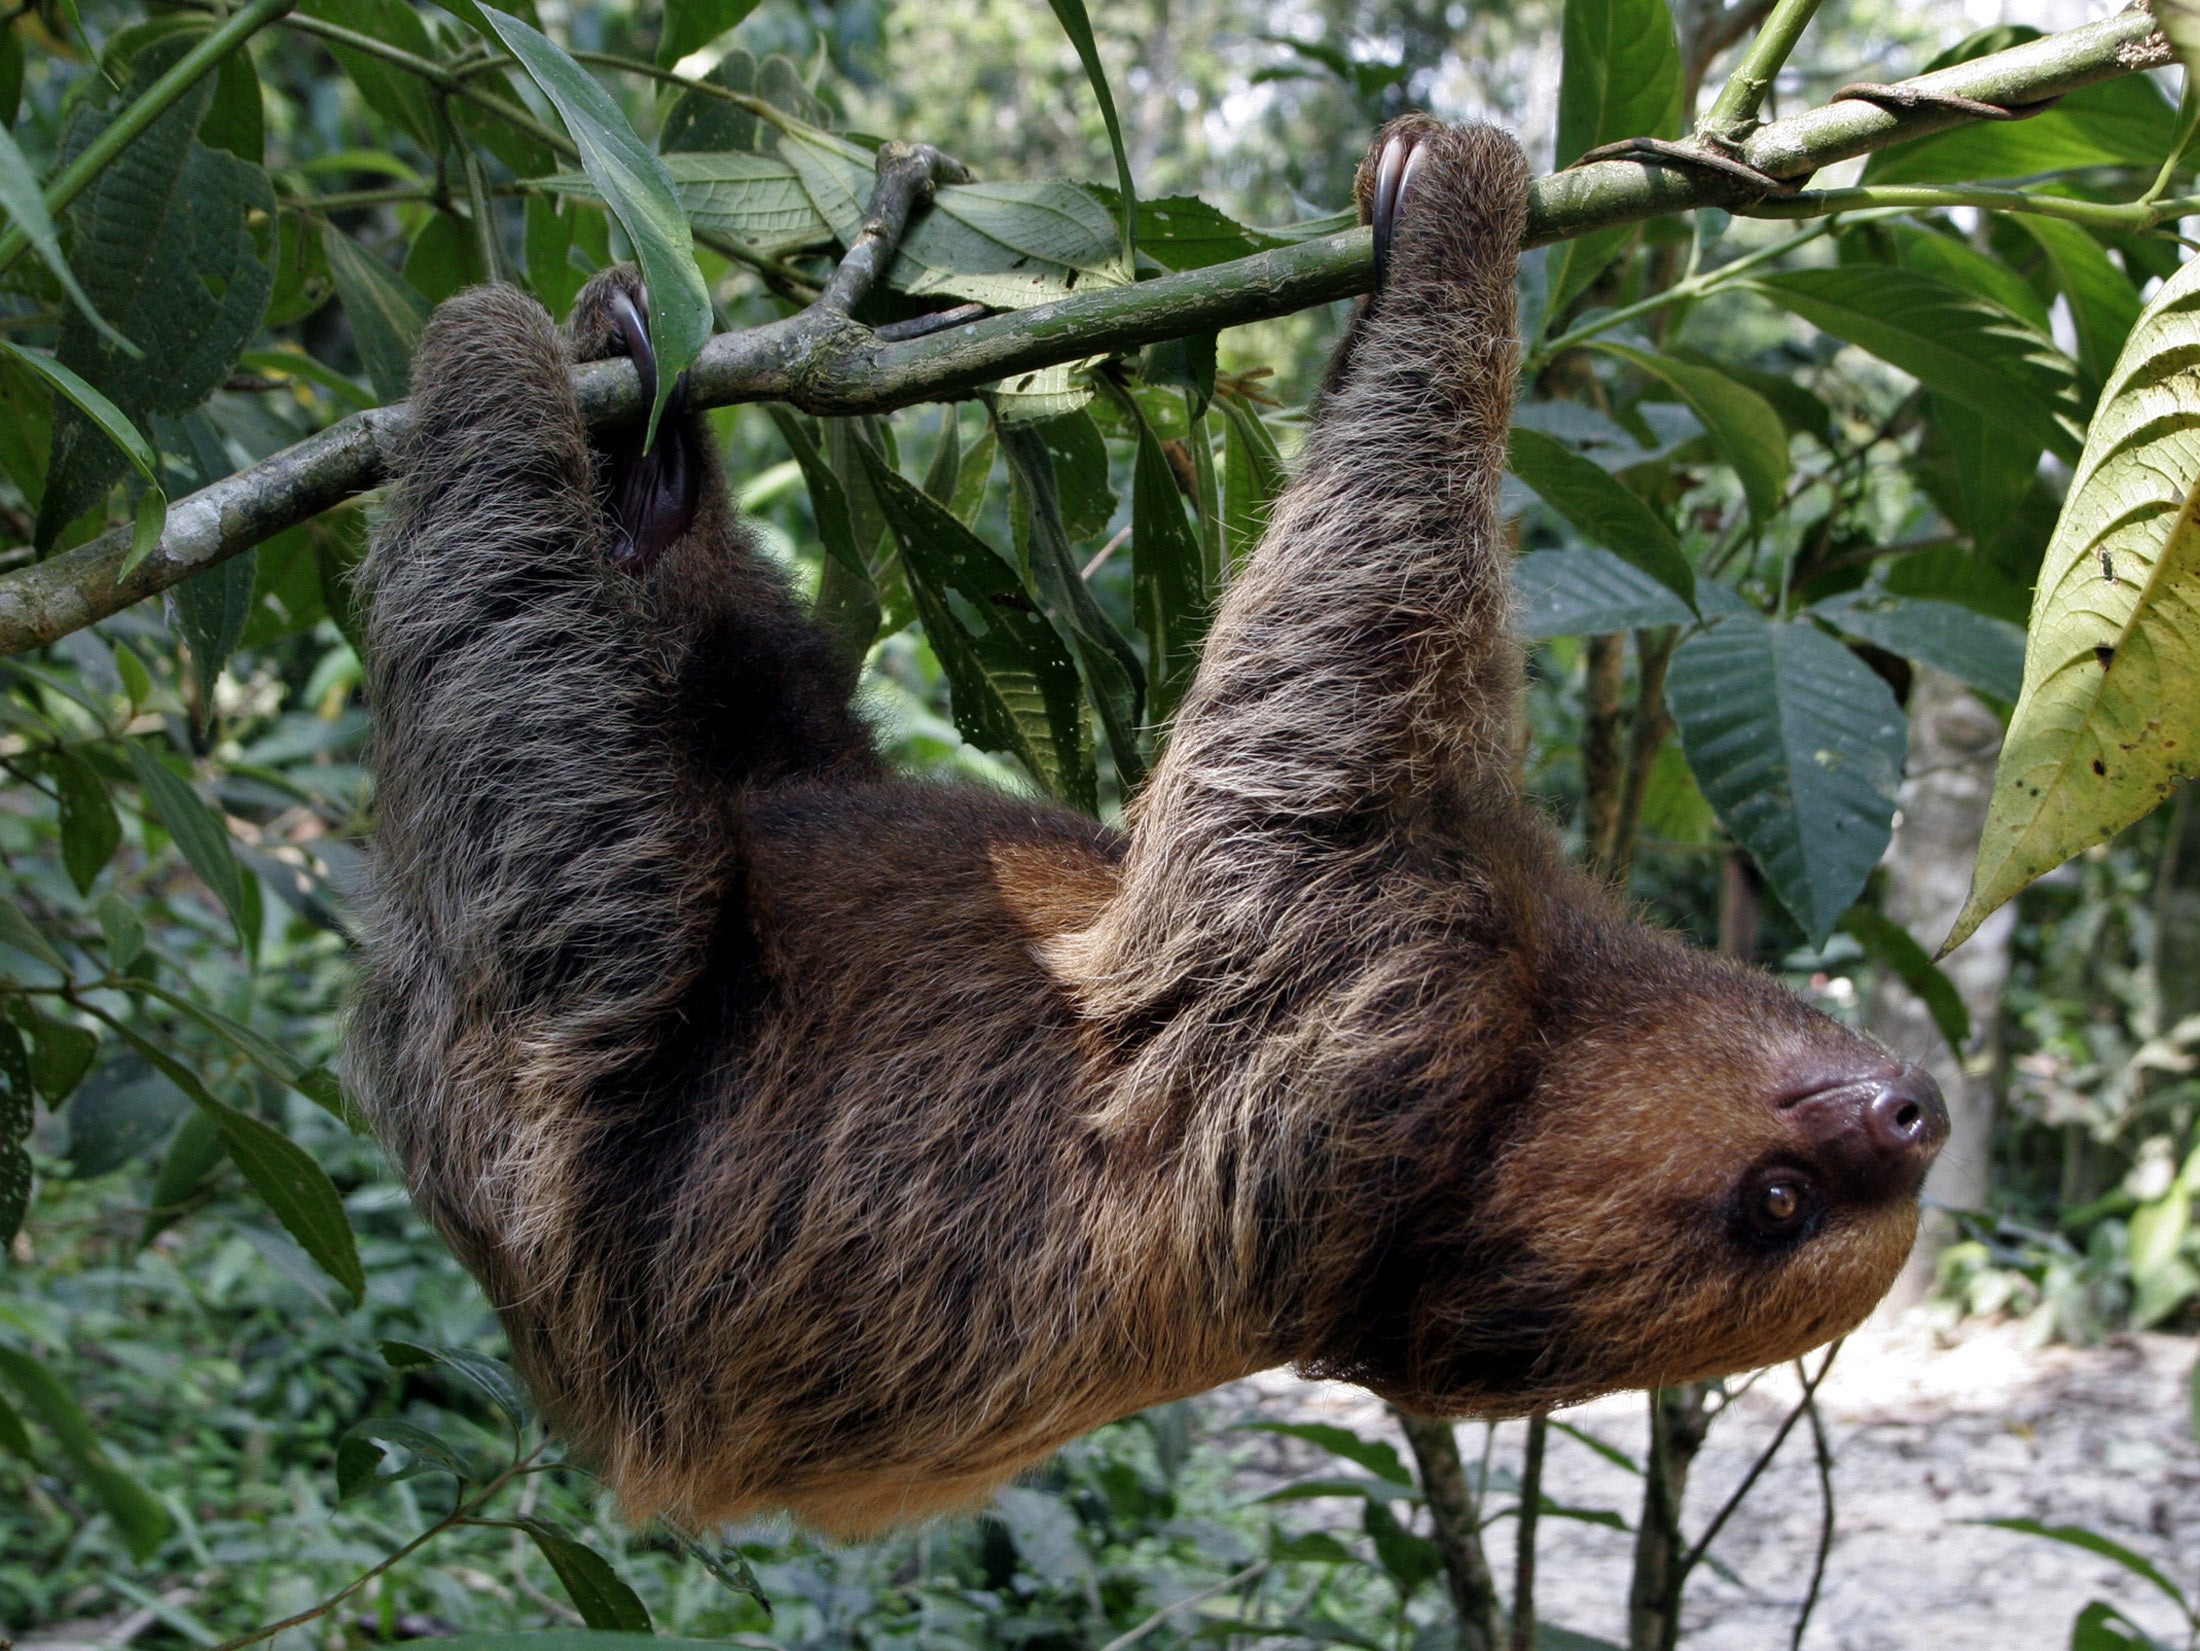 Why do sloths hang upside down? | The Independent | The Independent